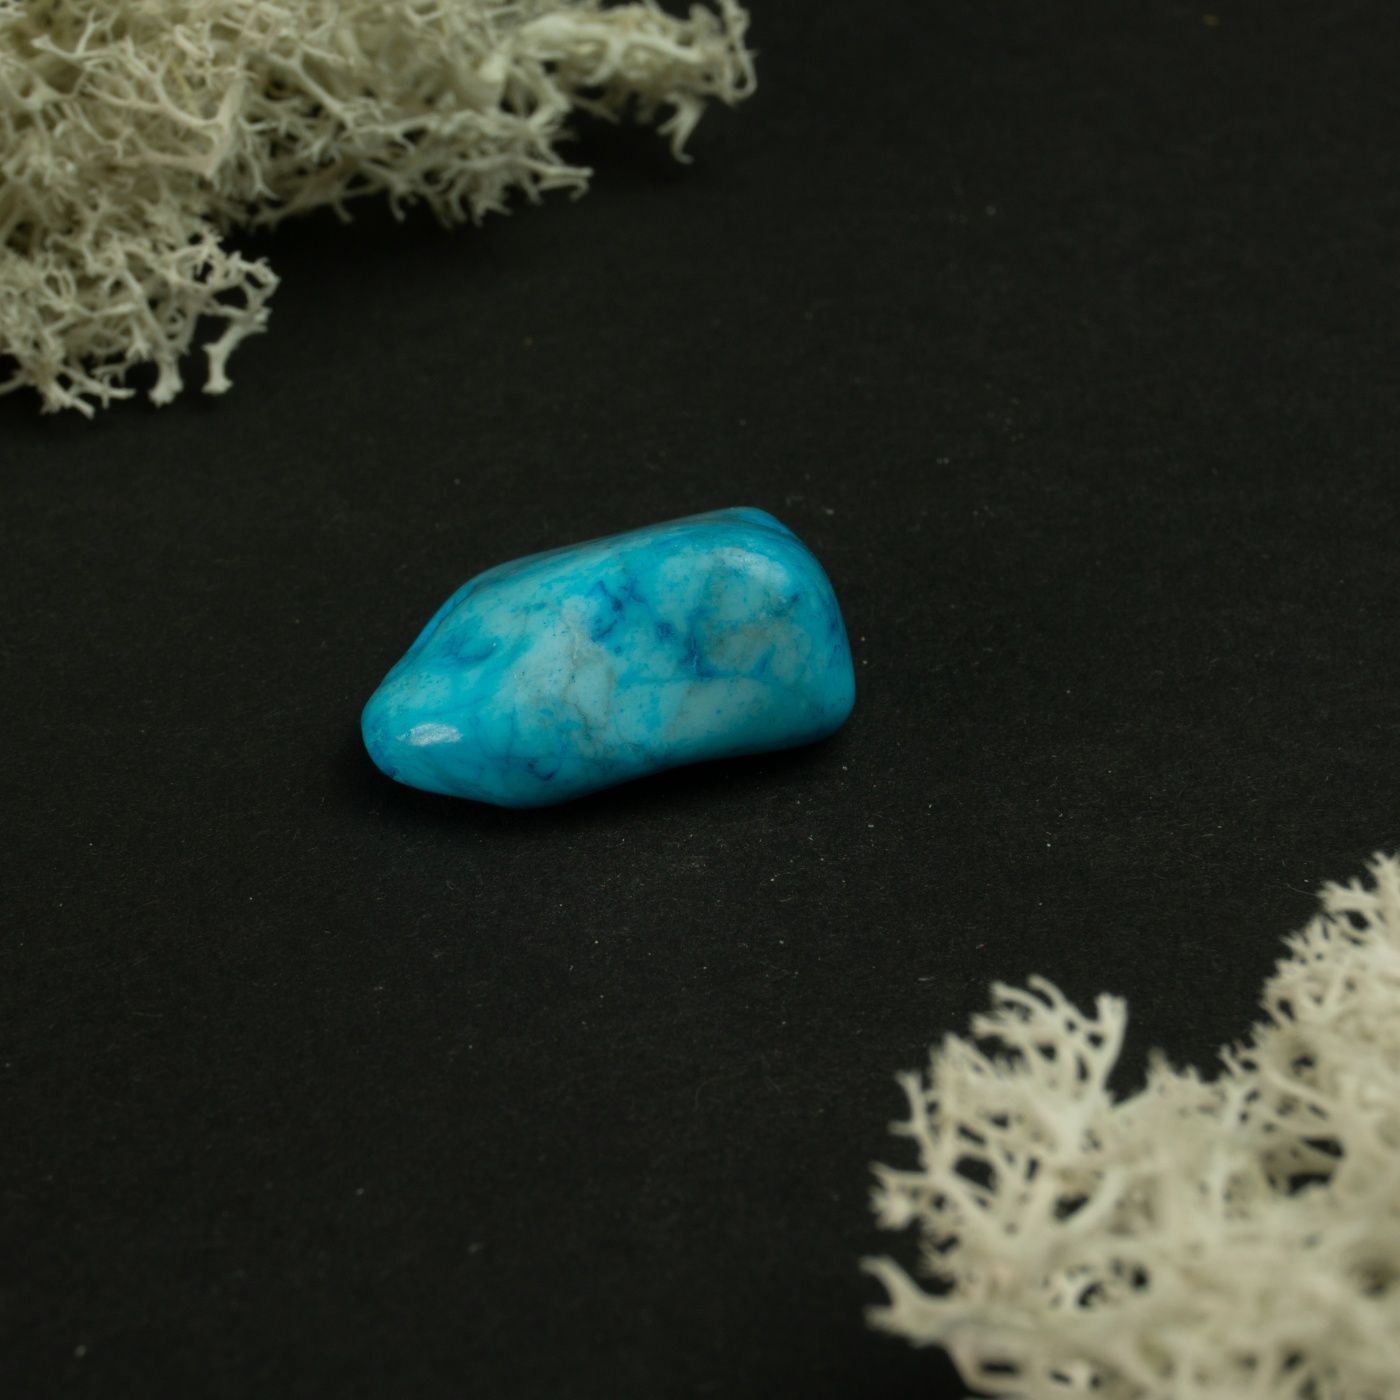 Turquoise Meaning Benefits and Spiritual Properties